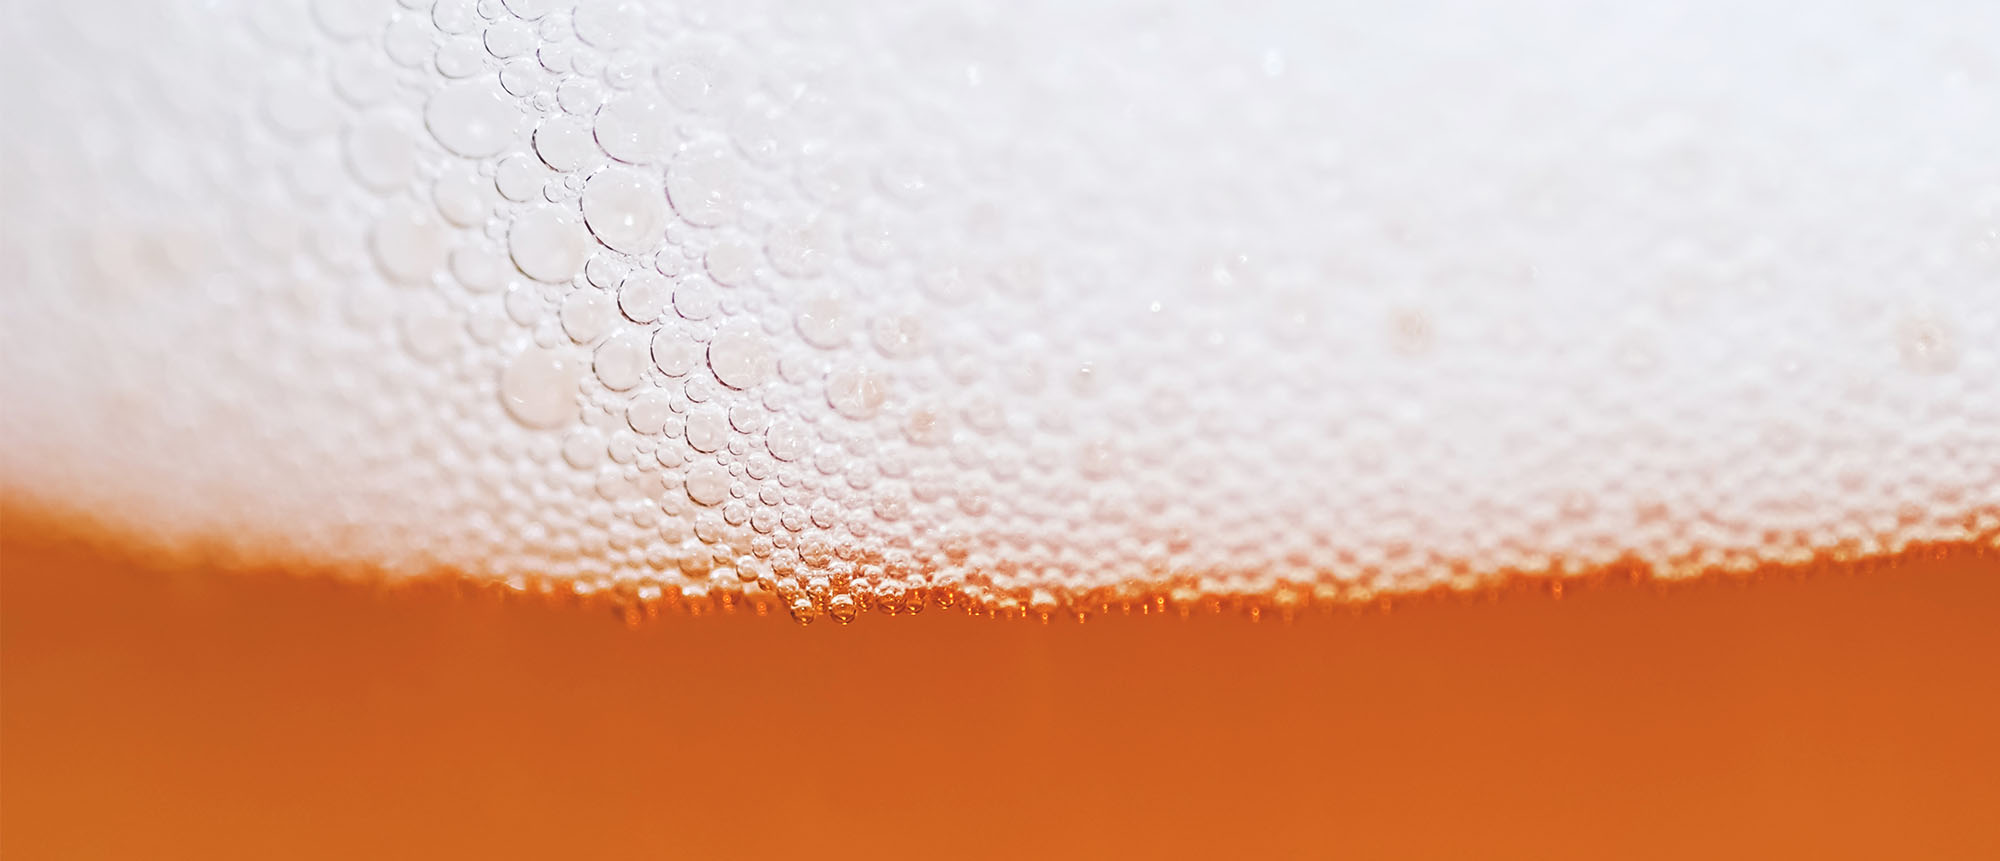 Improve the quality of the beer you are serving